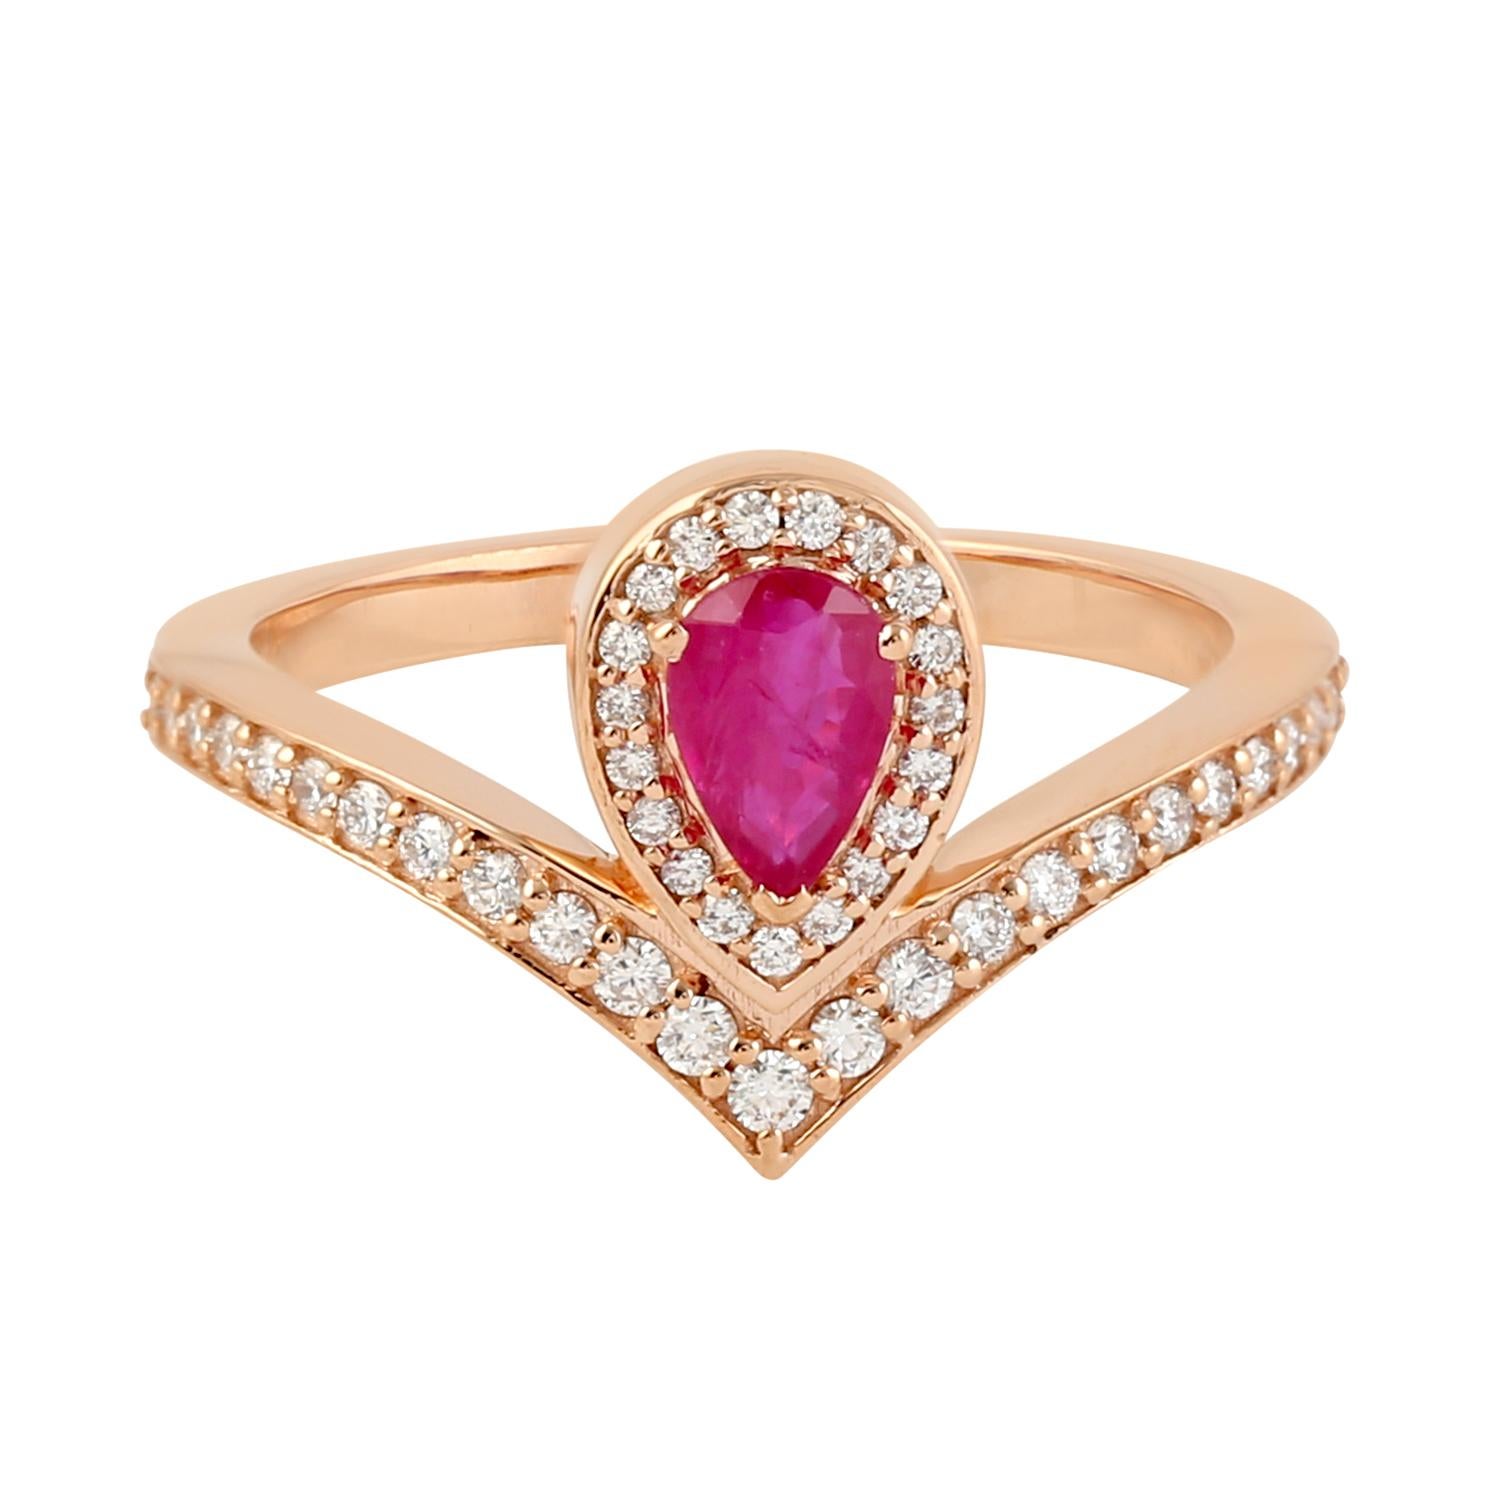 Mixed Cut Pear Shaped Ruby Ring Accented With Diamonds Made In 18k Rose Gold For Sale